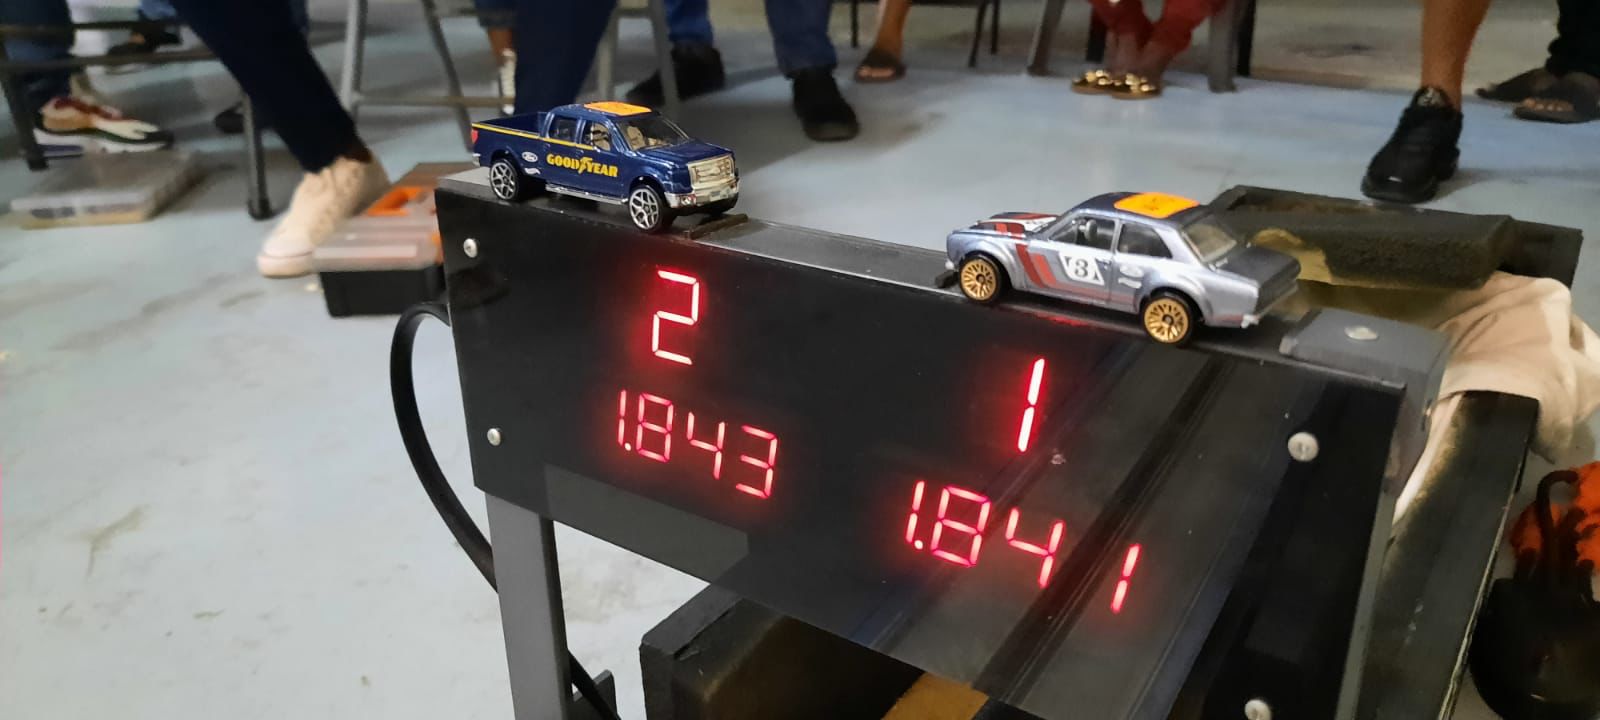 Curaçao Hotwheels Nationals 2022 Results 22 May 2022